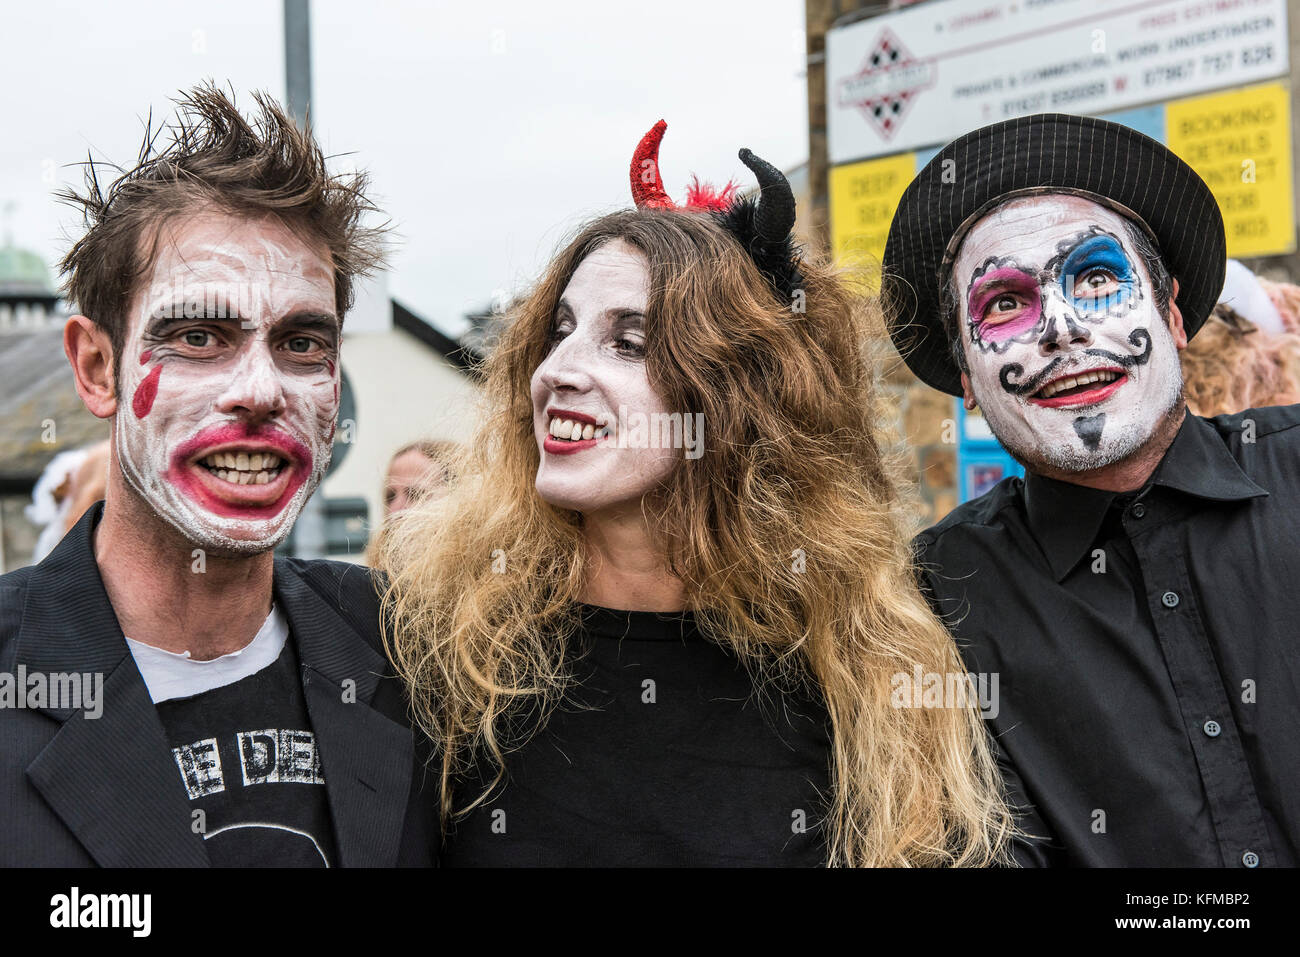 Zombies - three zombies friends in the annual Zombie Crawl in Newquay, Cornwall. Stock Photo